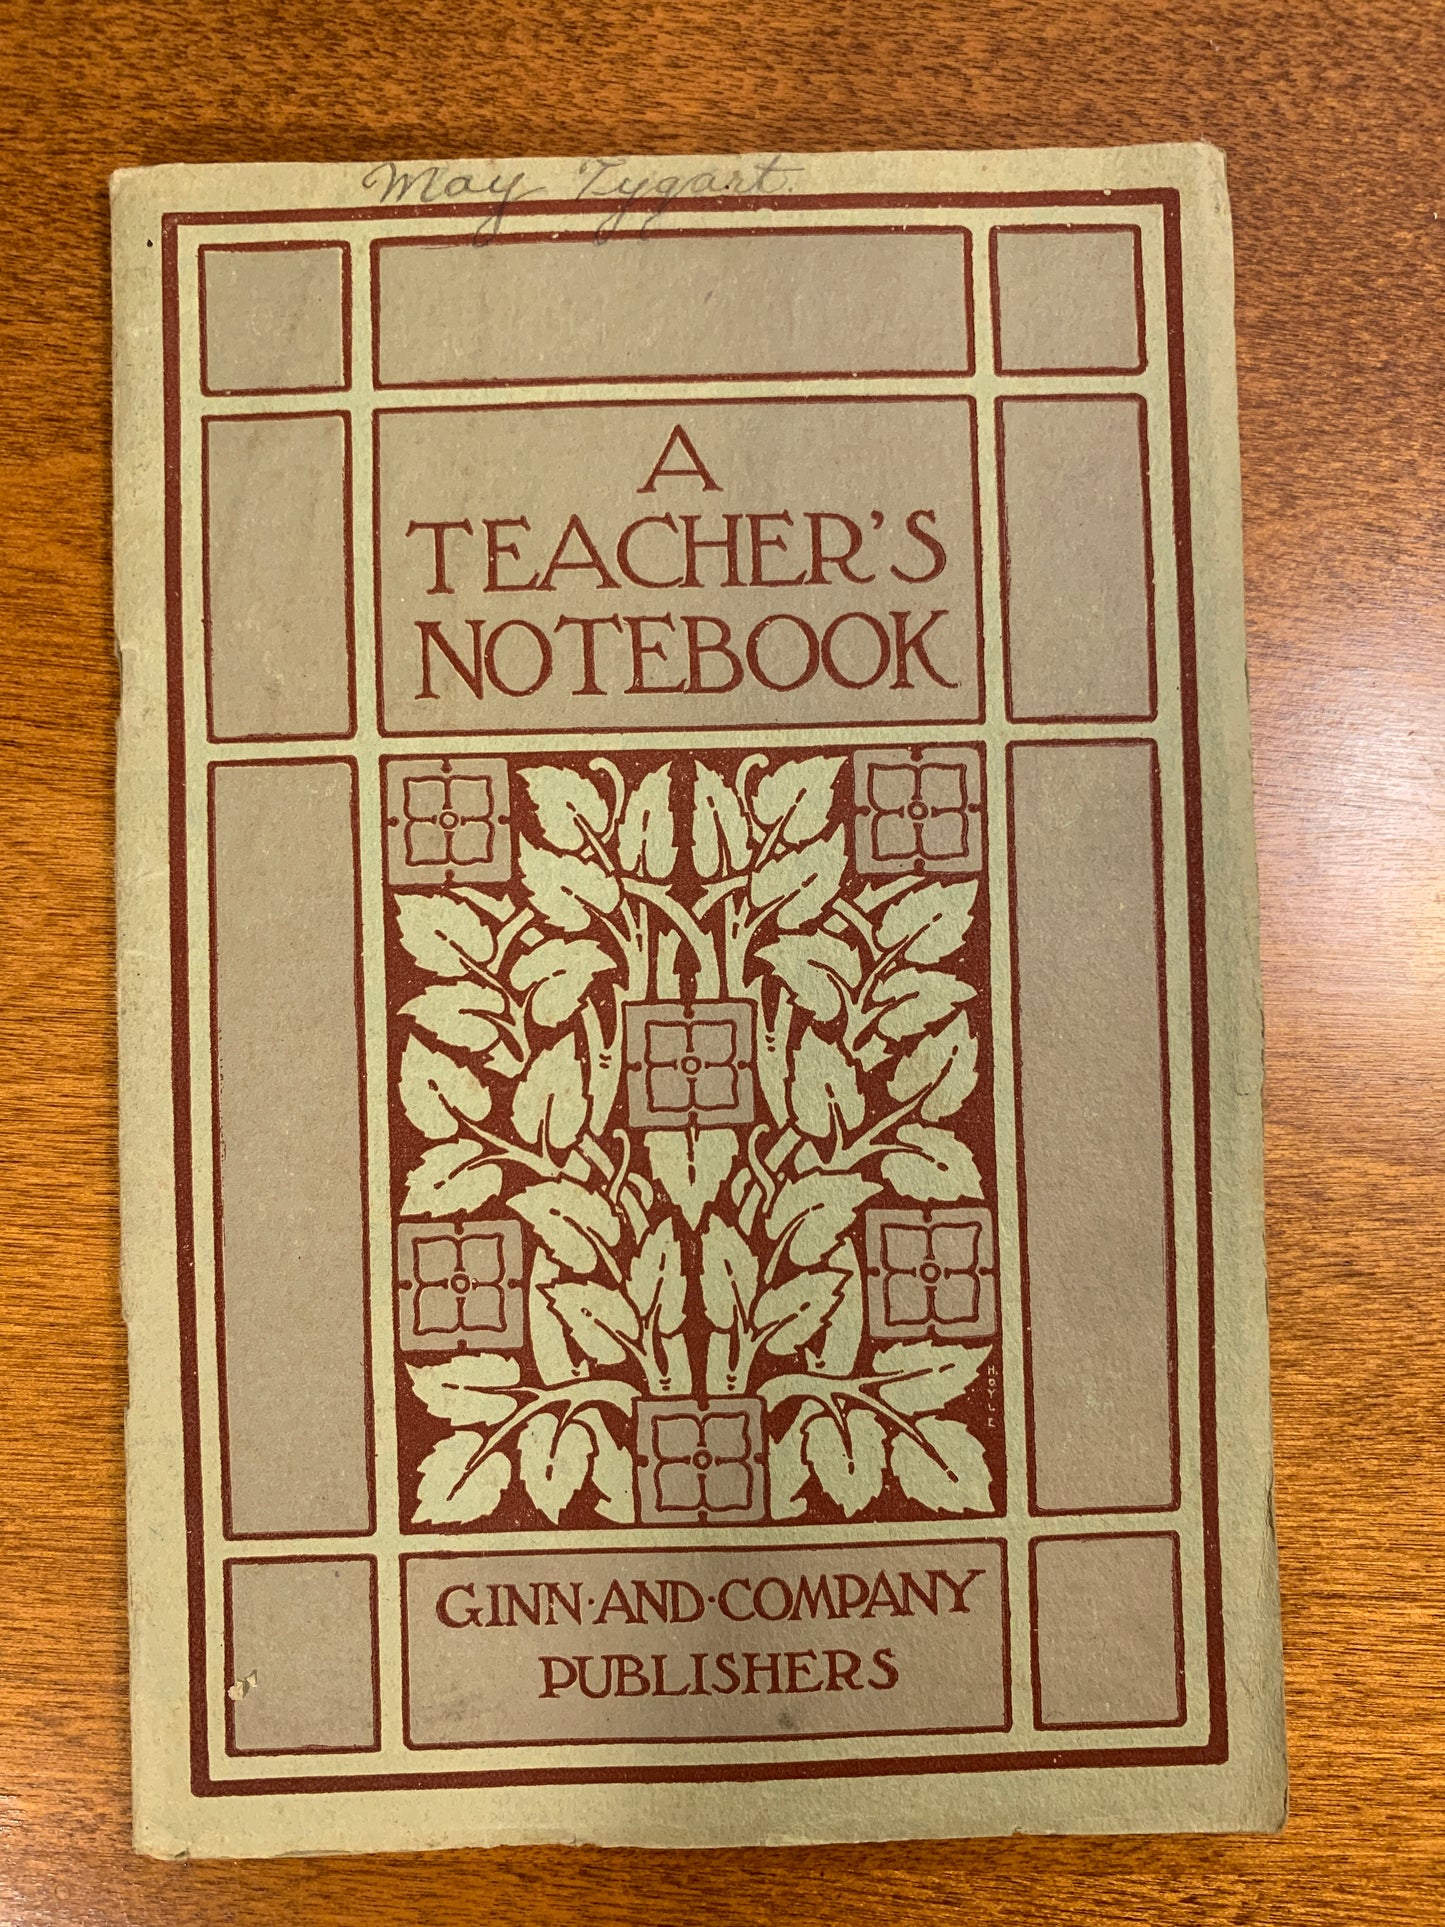 A Teachers Notbook by Ginn and Company Publishers